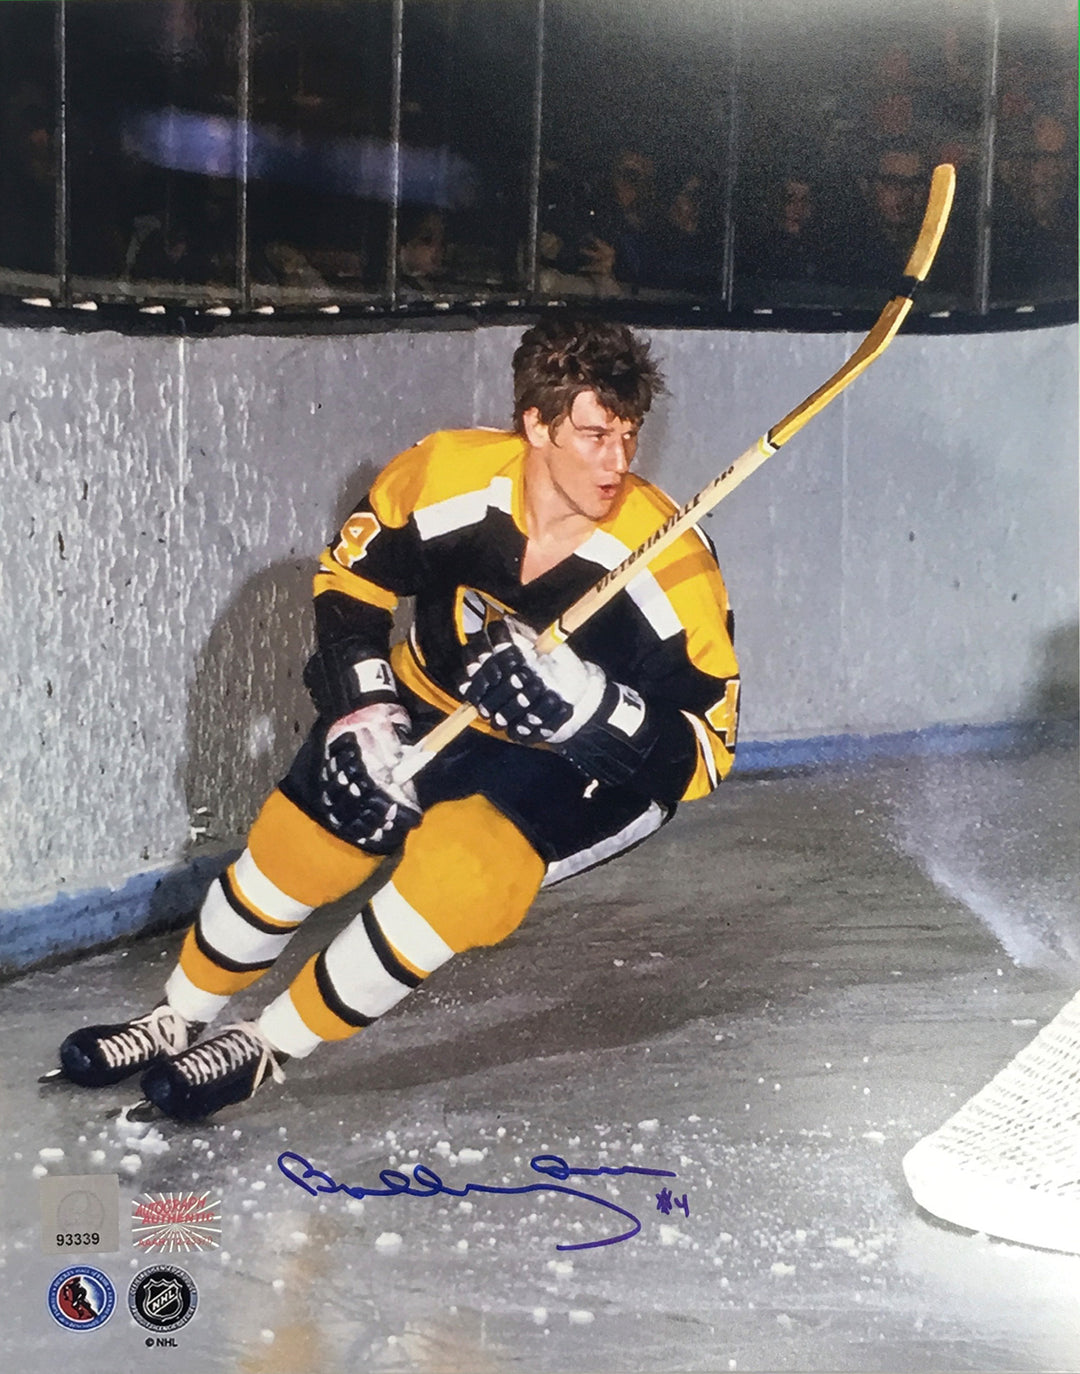 Bobby Orr Signed 11X14 Photo - Around The Net, Boston Bruins, NHL, Hockey, Autographed, Signed, AAHPH33169